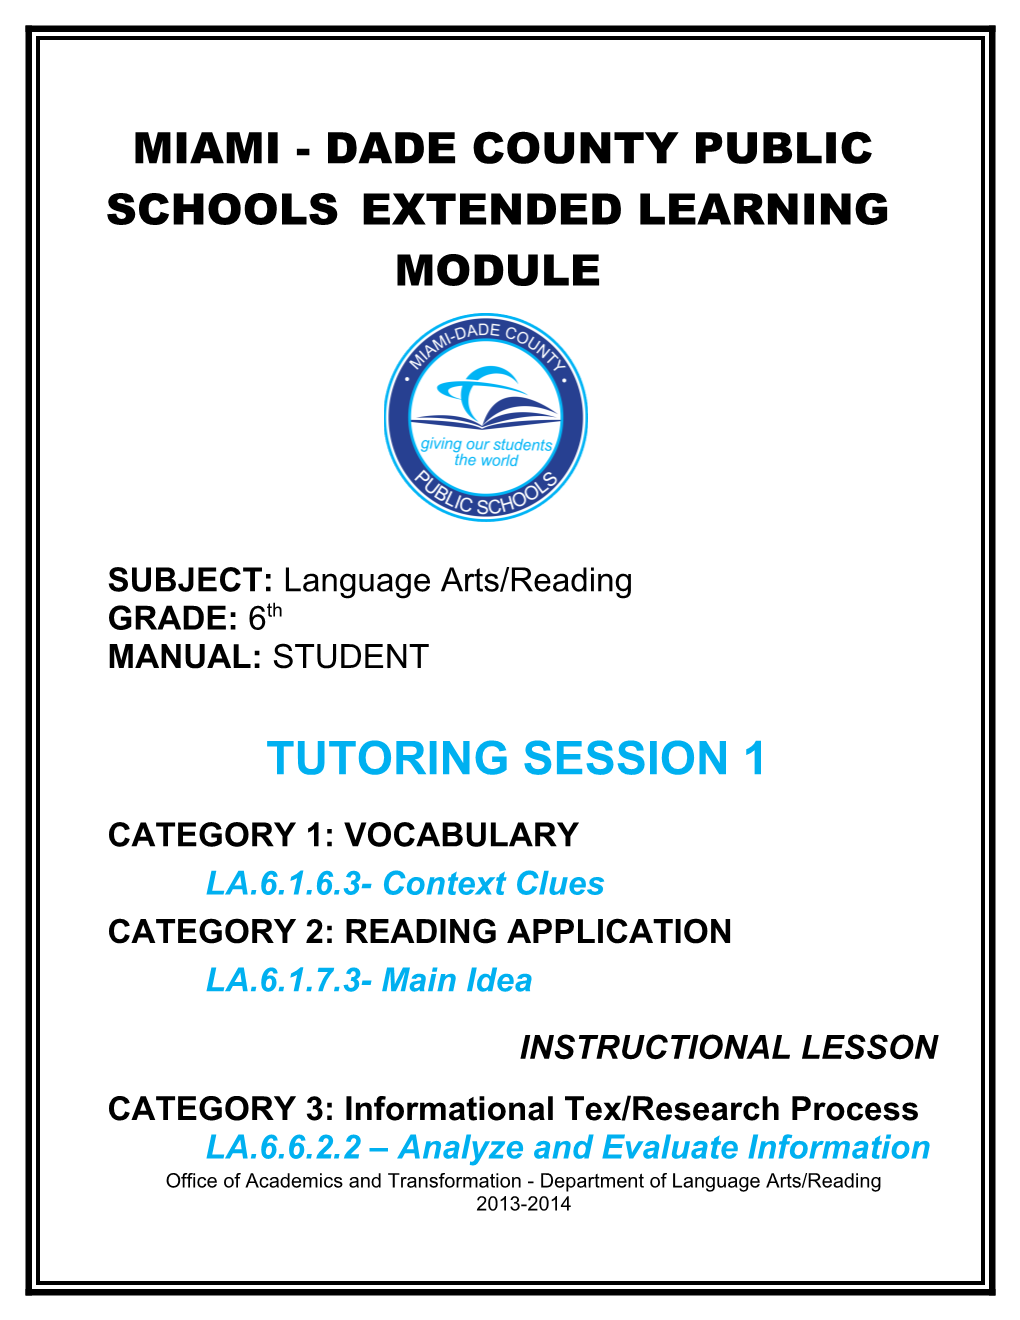 Miami - Dade County Public Schools Extended Learning Module